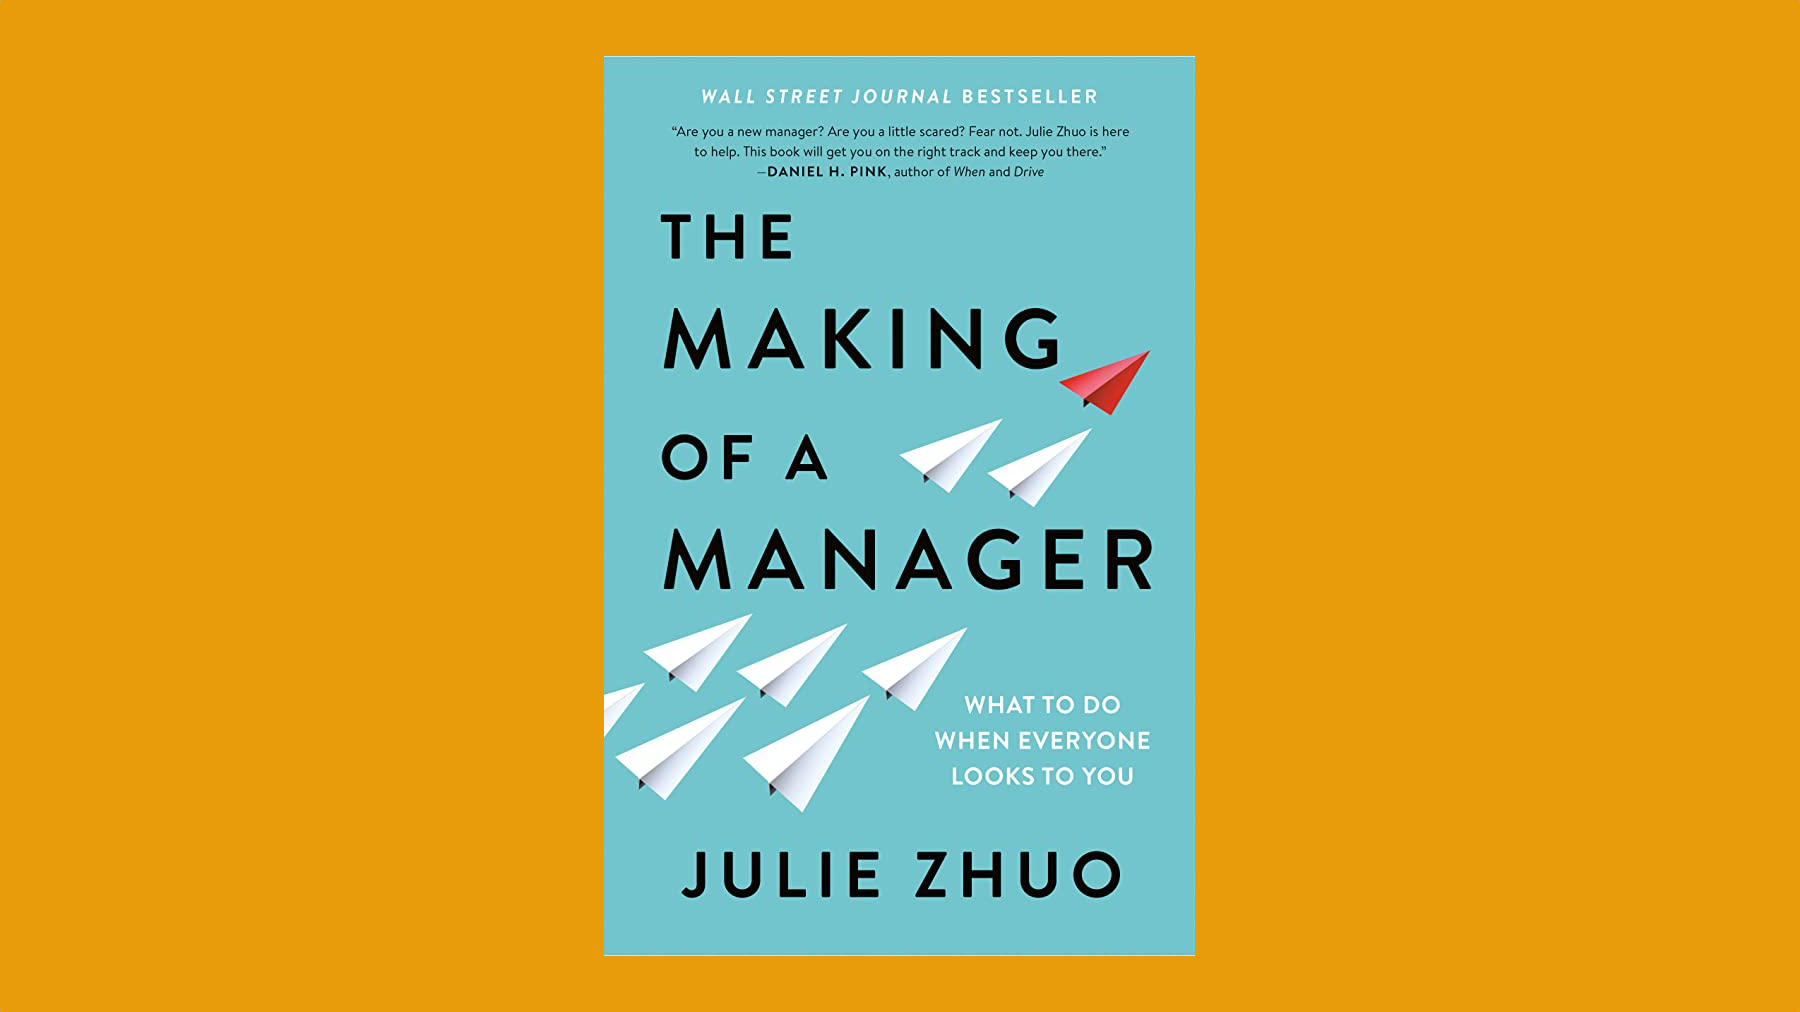 Book cover art for The Making of a Manager by Julie Zhou